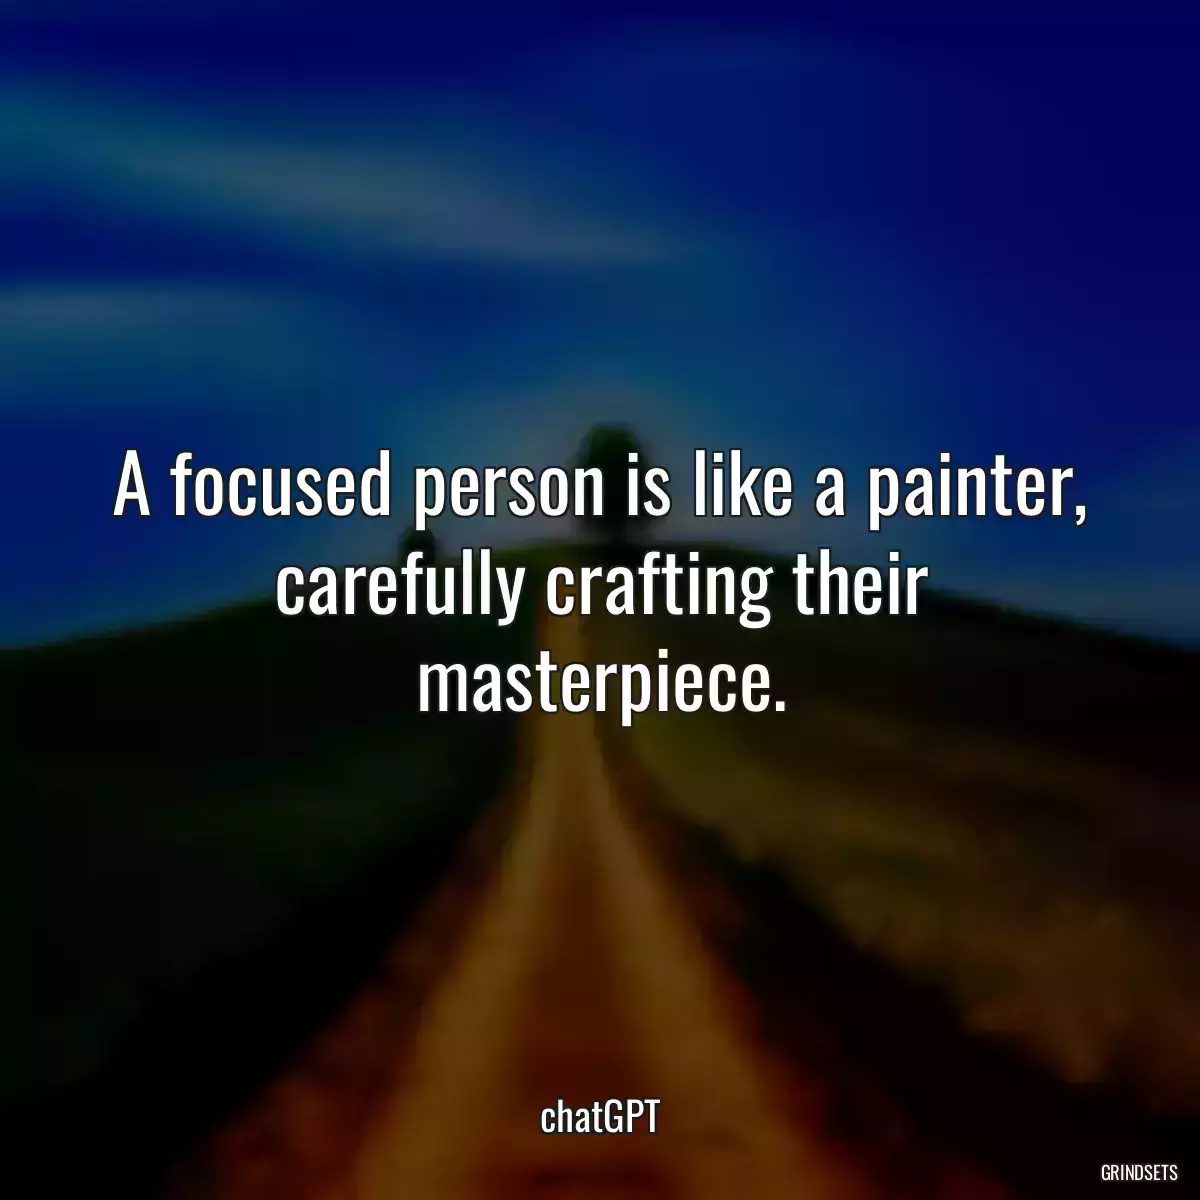 A focused person is like a painter, carefully crafting their masterpiece.